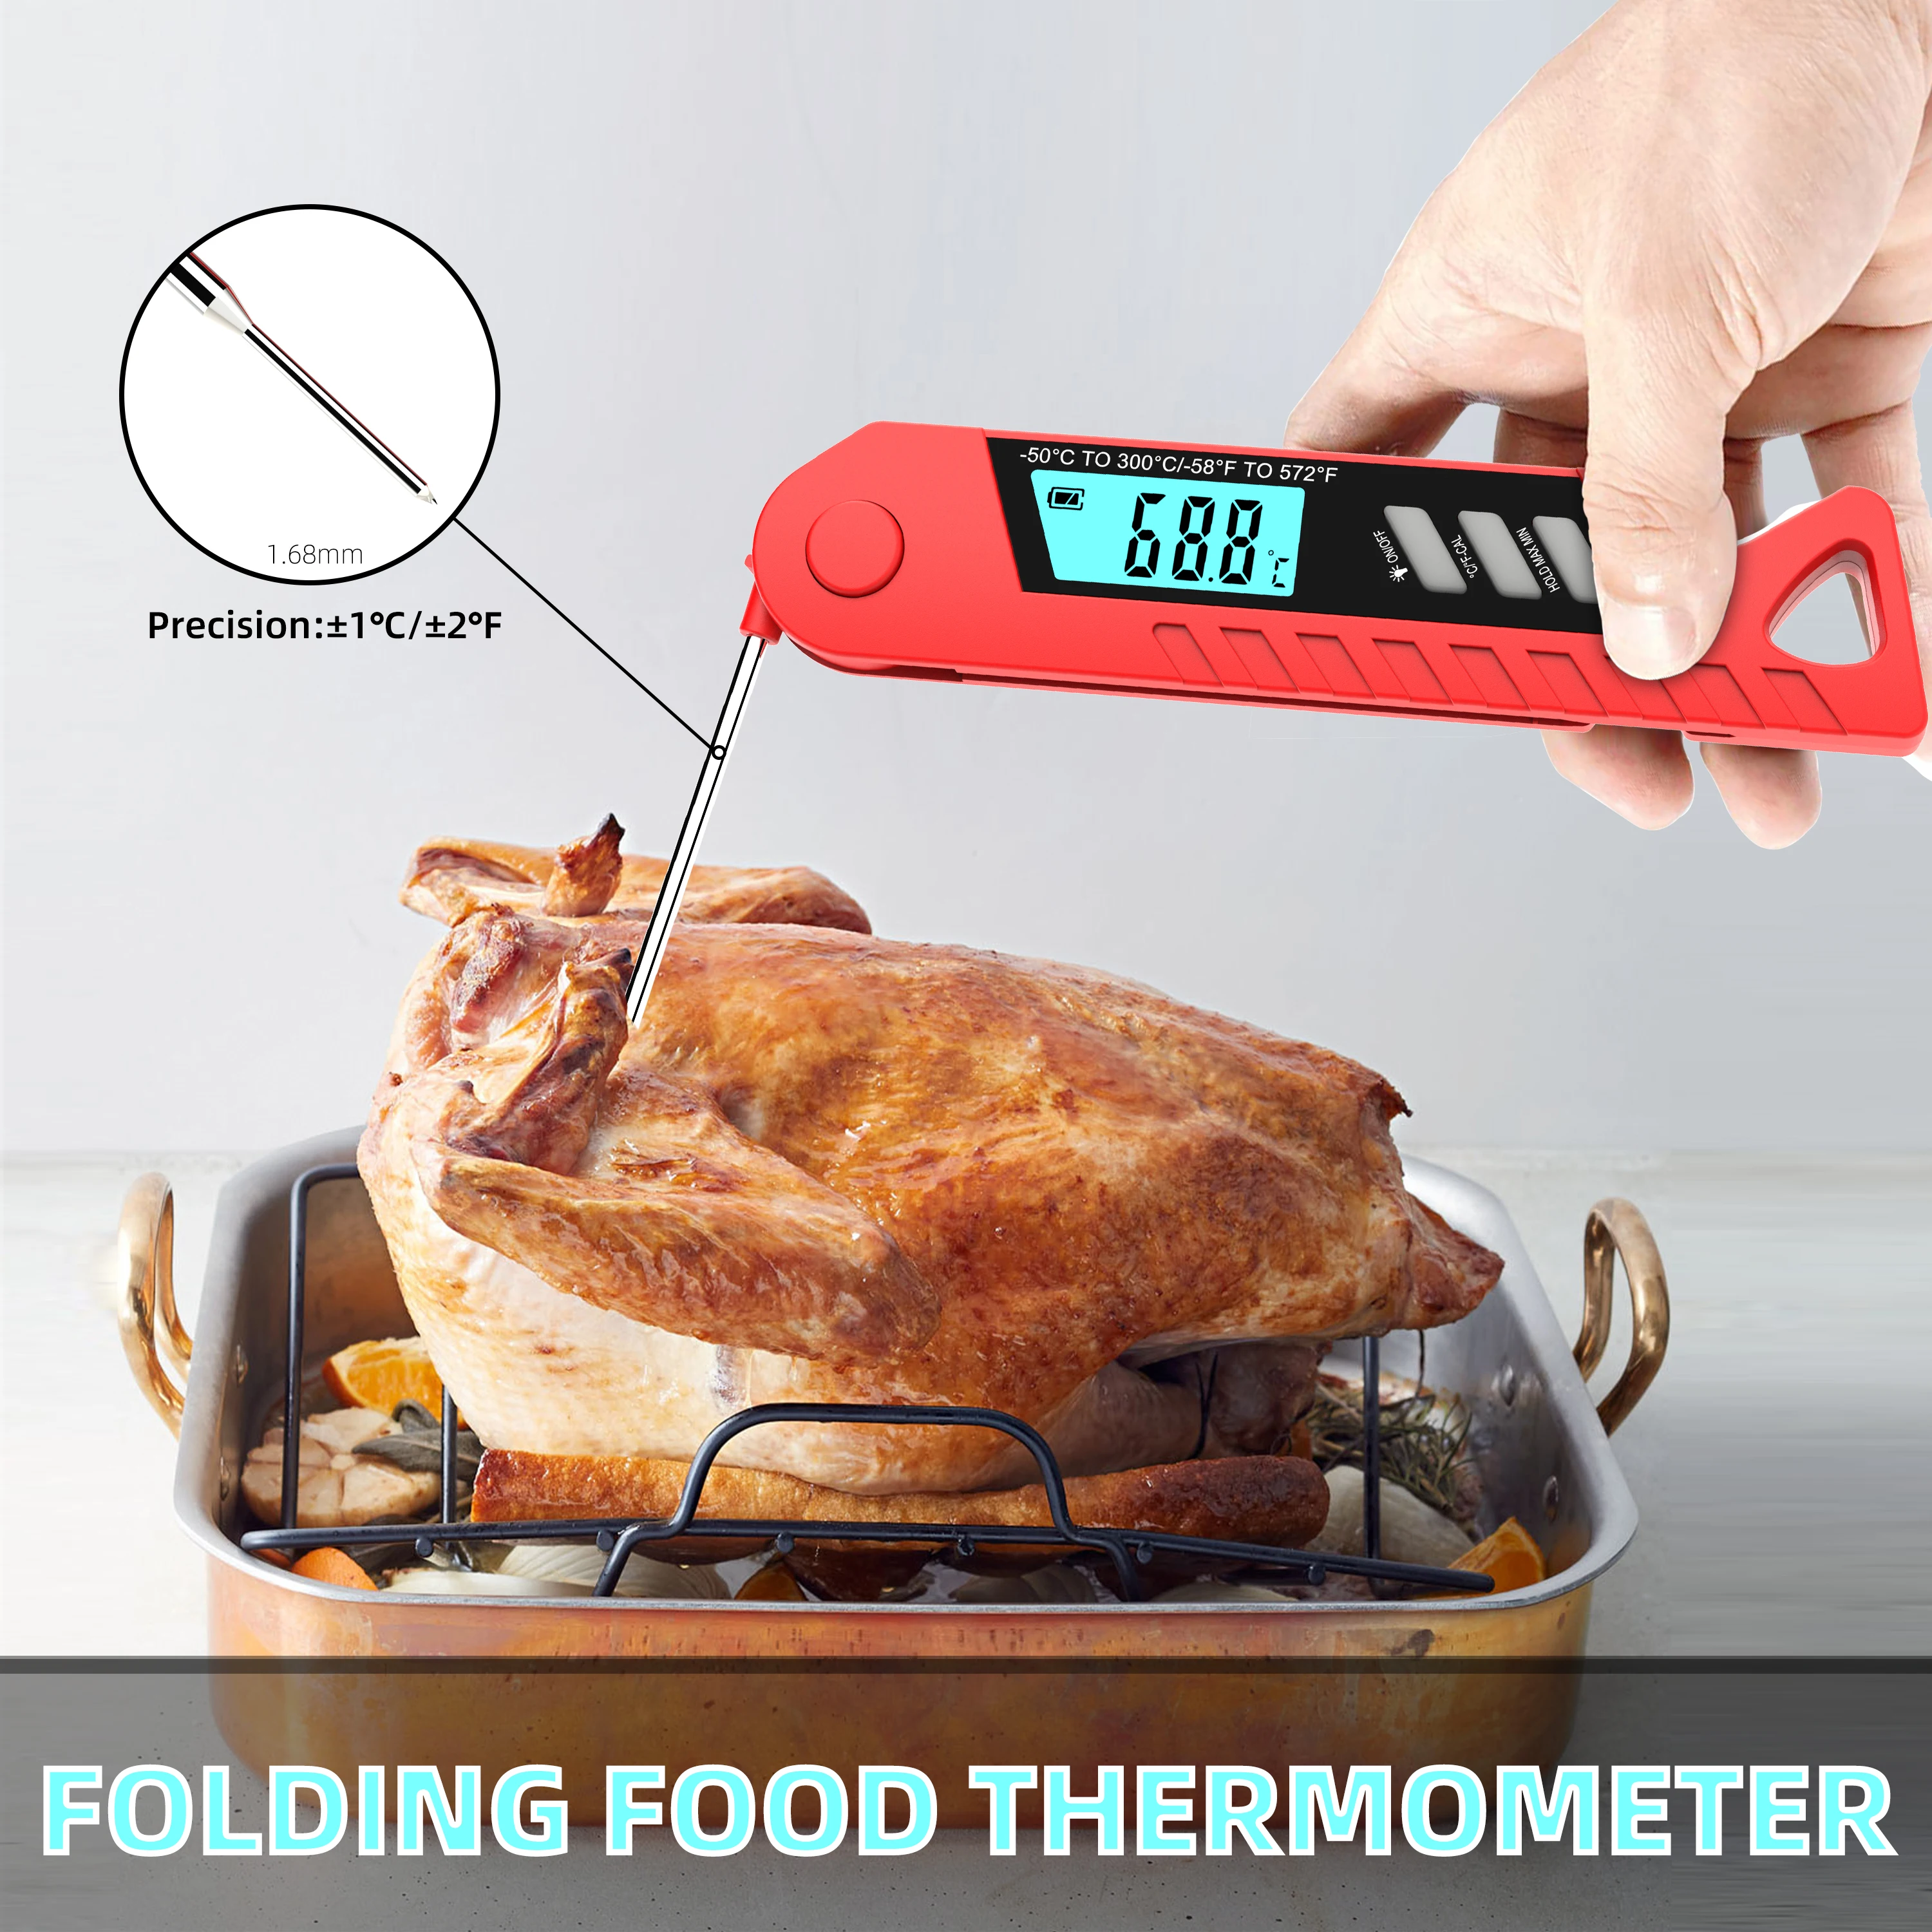 https://ae01.alicdn.com/kf/S80b8a8e04209470fb5e03c96c058caa0a/Digital-Meat-Food-Thermometer-Oven-Meat-Milk-Digital-Cooking-Thermometer-With-BBQ-Waterproof-Kitchen-Cooking-Tools.jpg